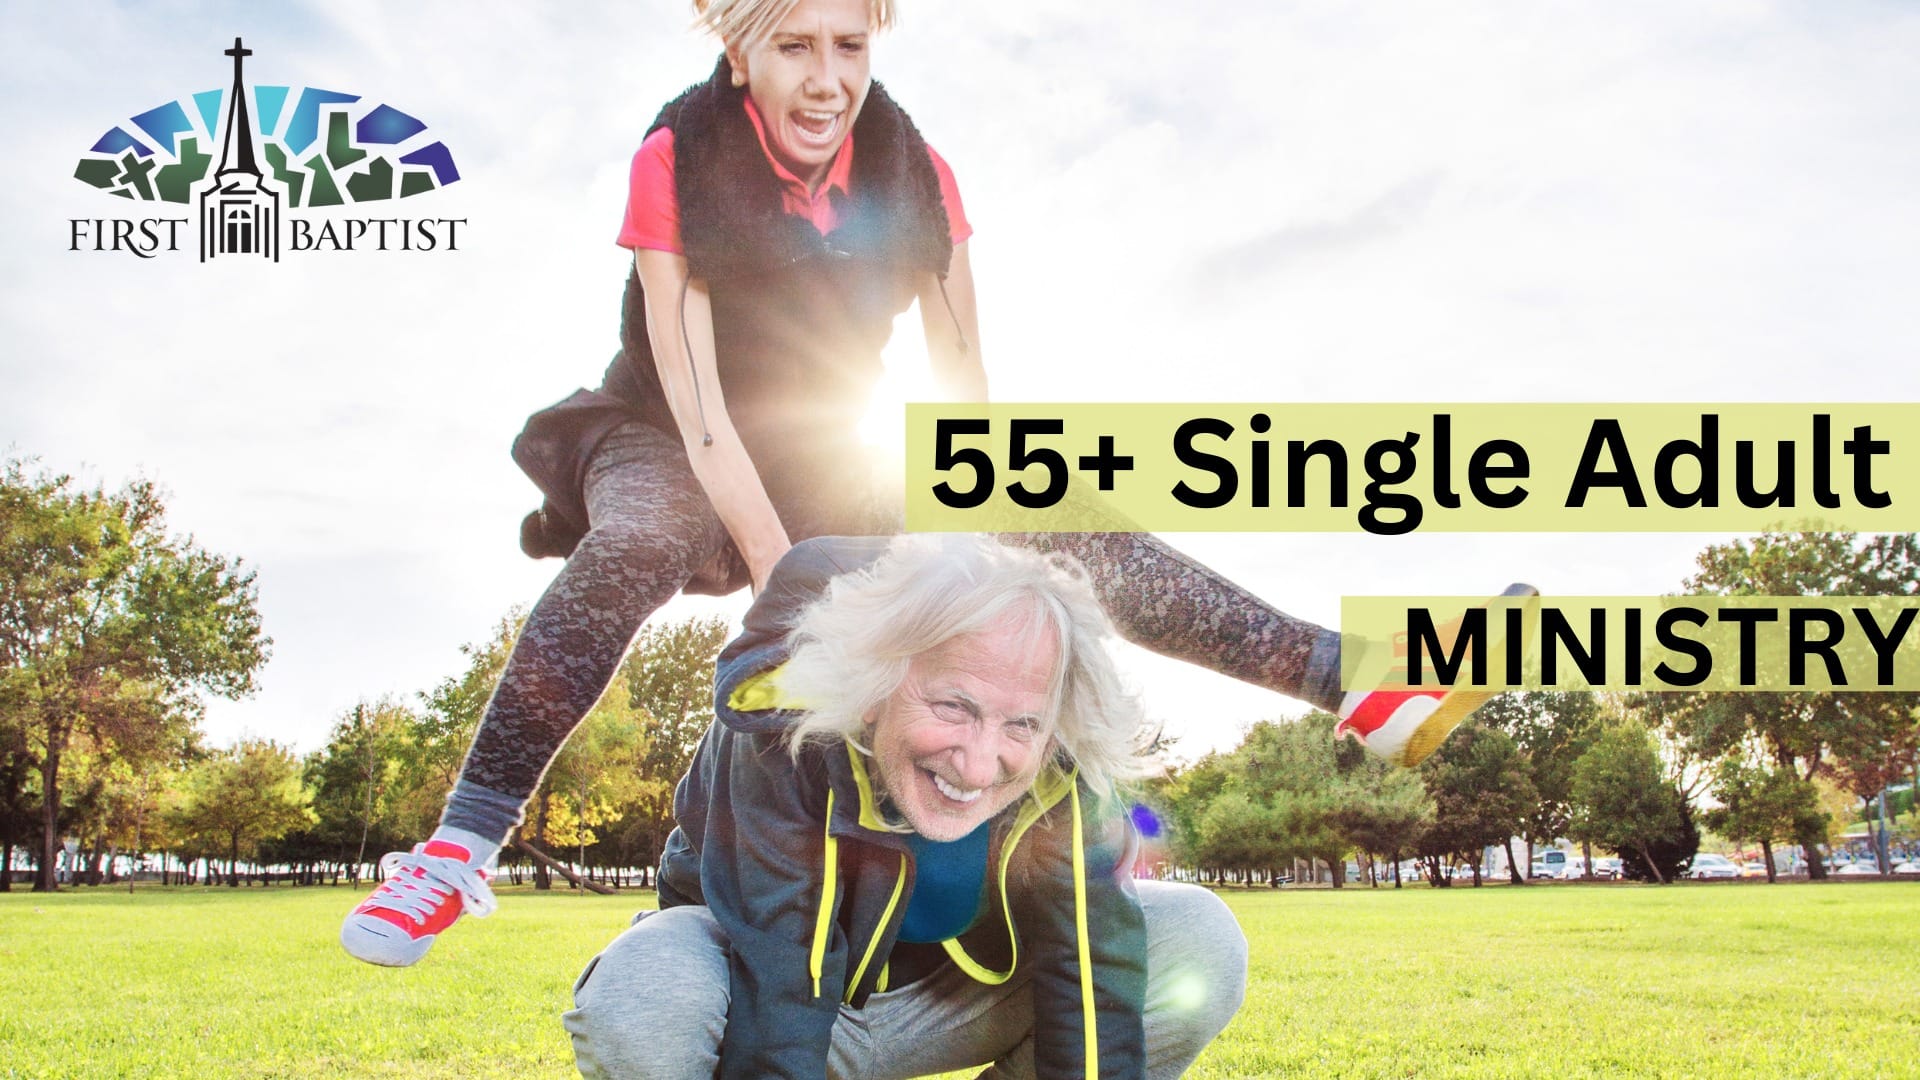 55+ Single Adult Ministry Flyer